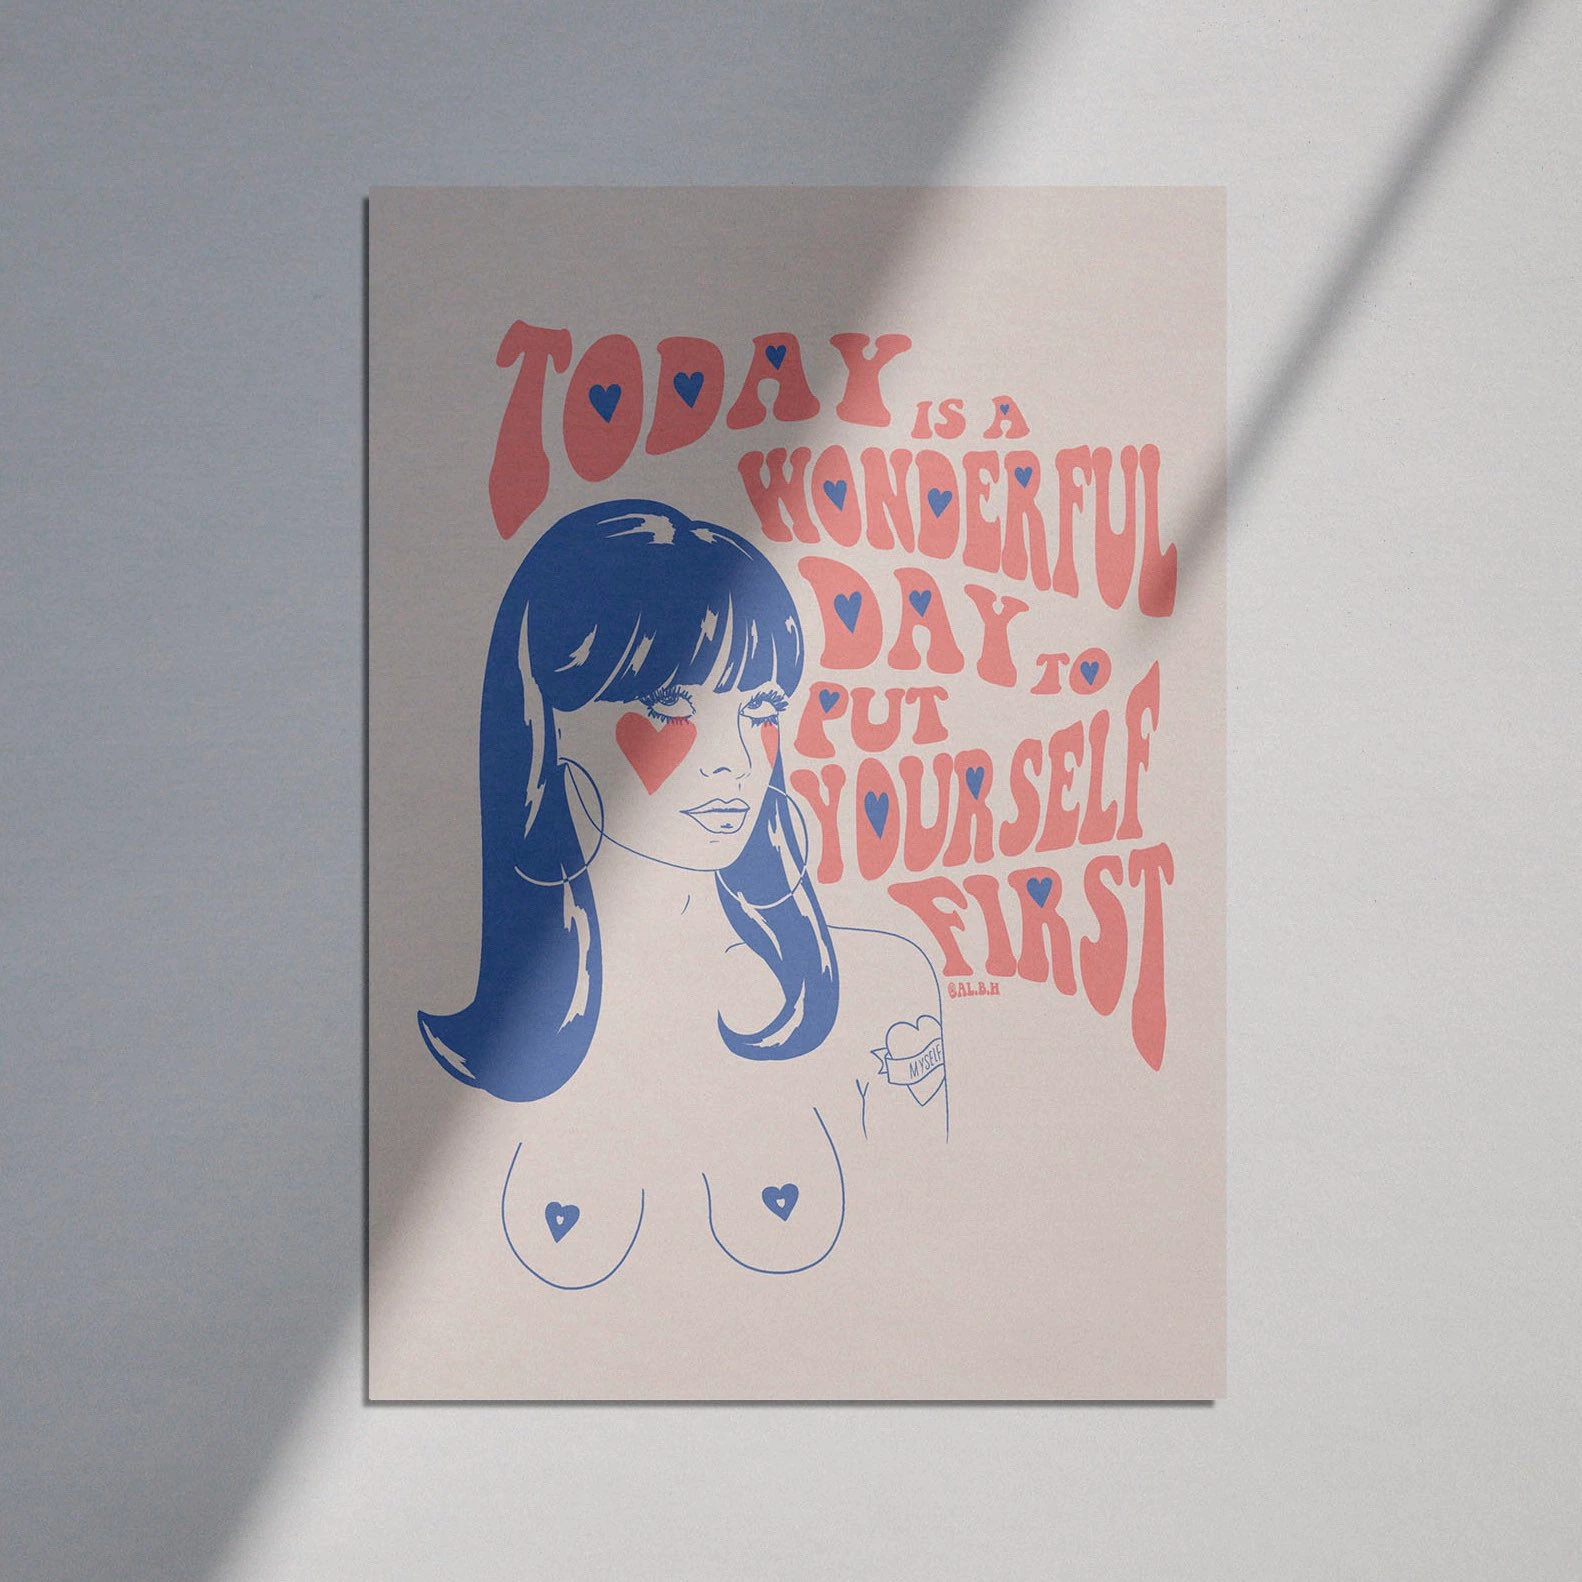 Feminist Art Print A4A5A3  A Wonderful Day to Put Yourself First  Self Love Feminism Pink and Blue Illustration